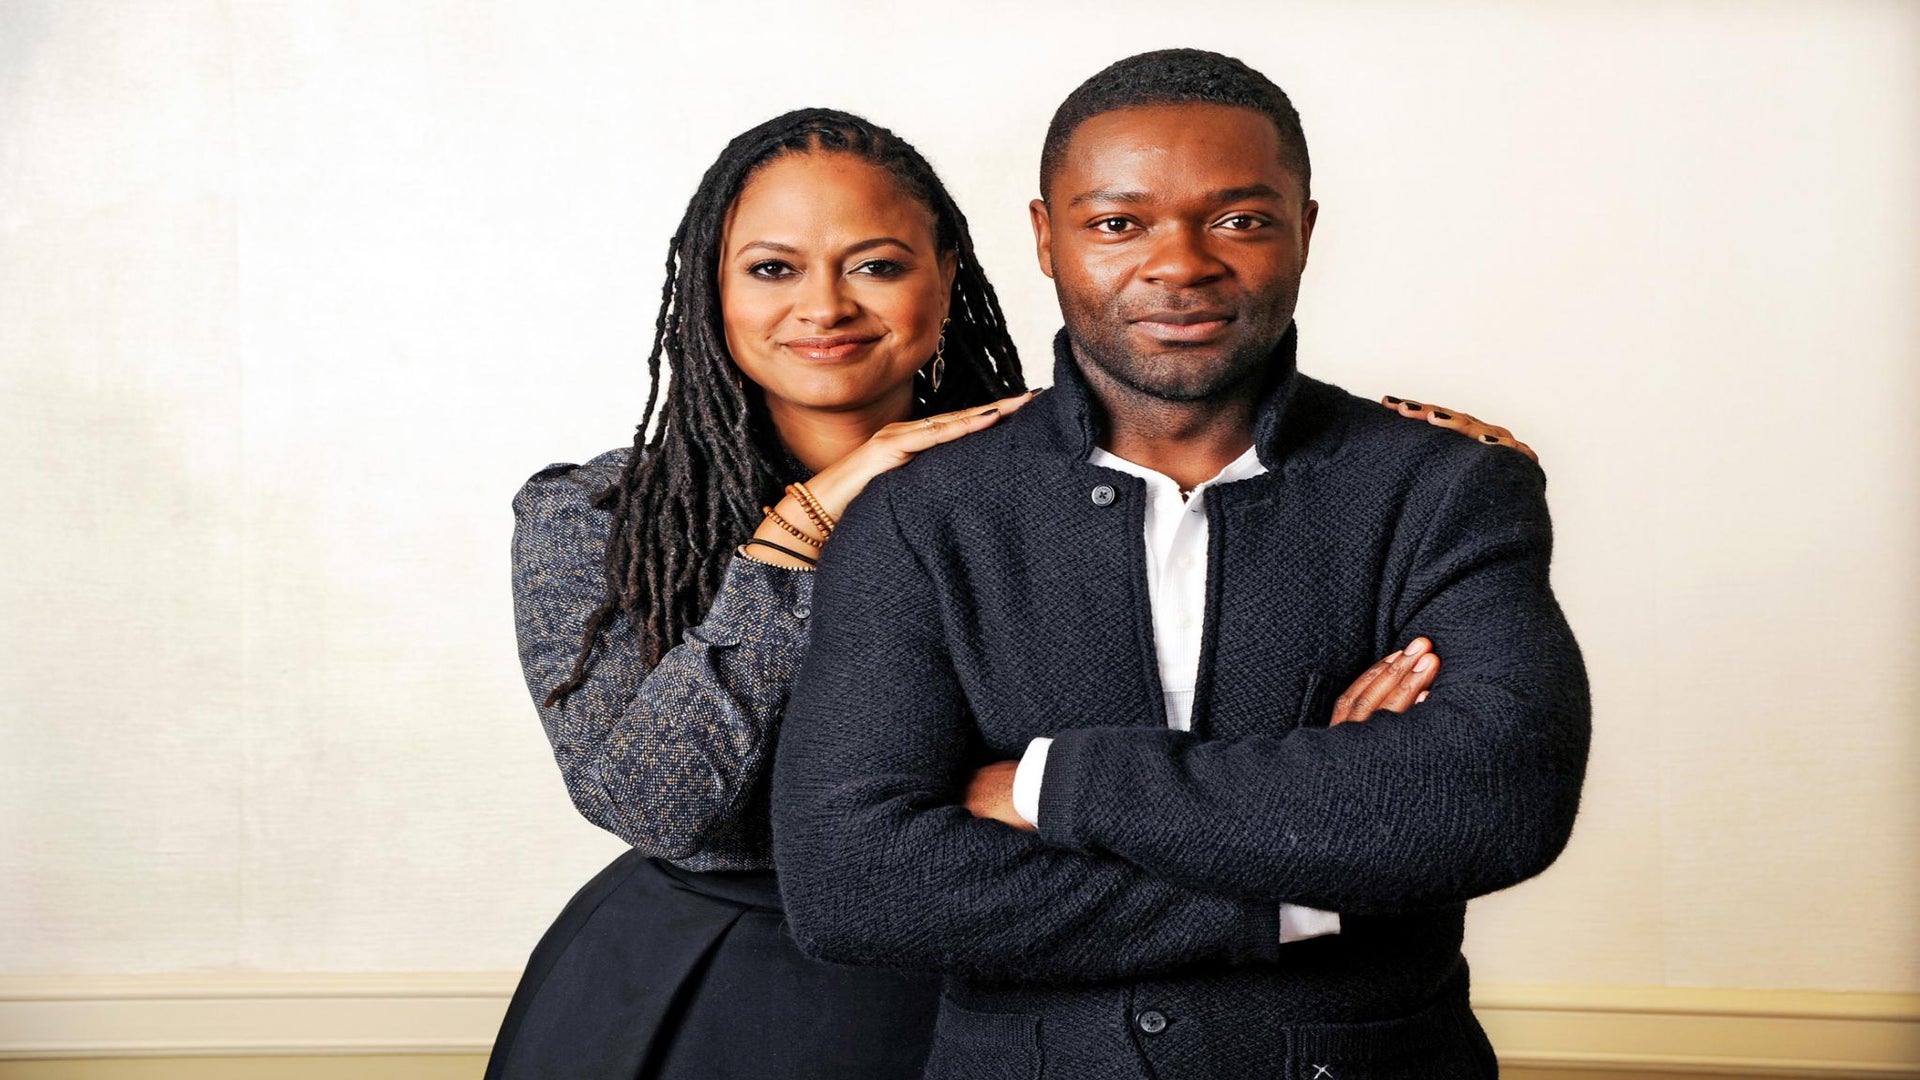 David Oyelowo Reveals The Academy Punished 'Selma' Cast For Wearing 'I Can't Breathe' Shirts